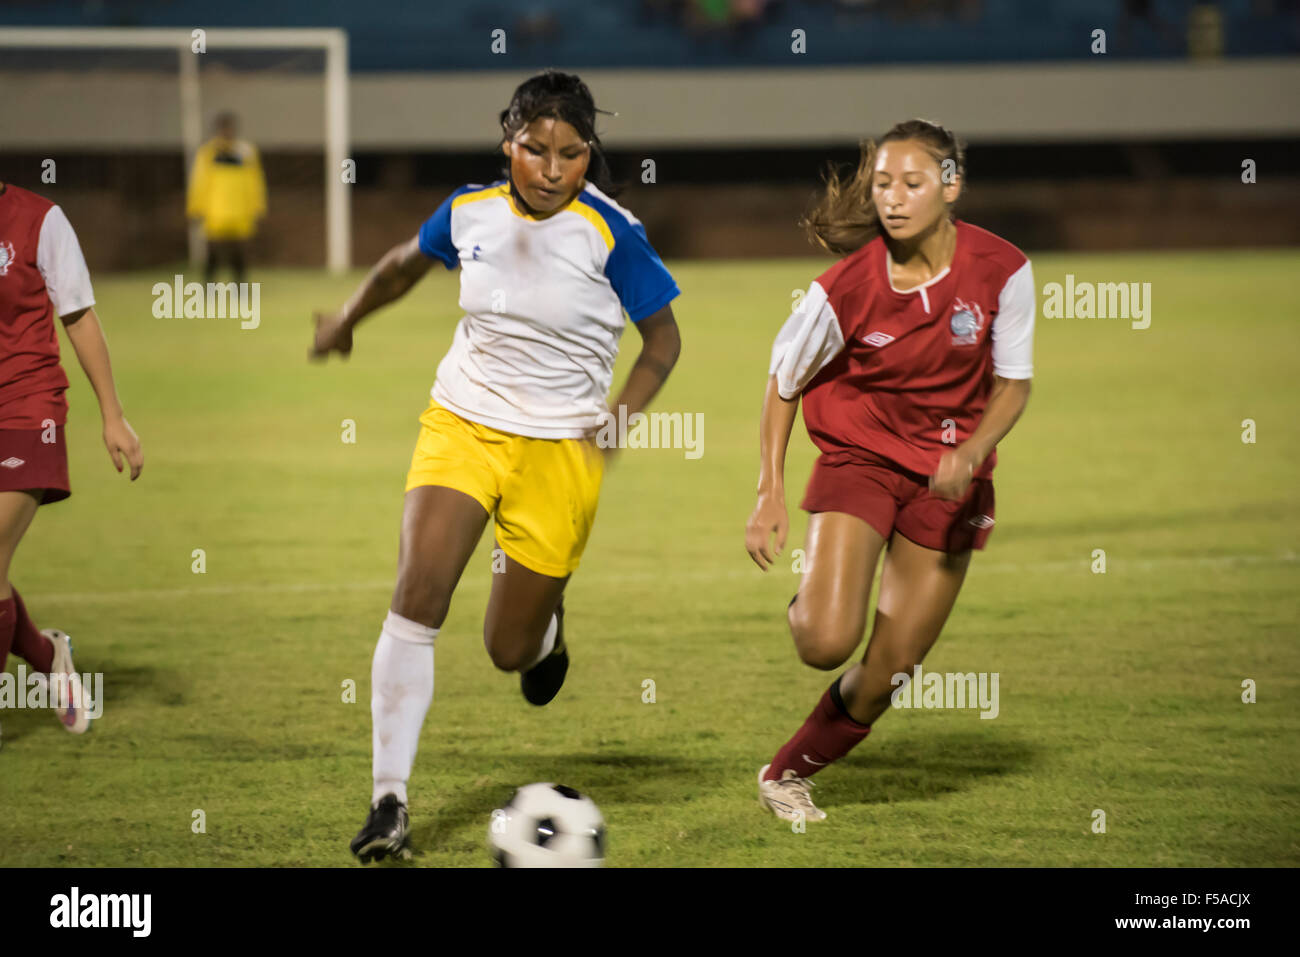 Palmas, Brazil. 30th October, 2015. Two women compete for the ball during the final of the women's football, between the local Xerente tribe and the Native American team from the USA at the International Indigenous Games in the city of Palmas, Tocantins State, Brazil. The USA won on a penalty shoot-out after a 0-0 match. Credit:  Sue Cunningham Photographic/Alamy Live News Stock Photo